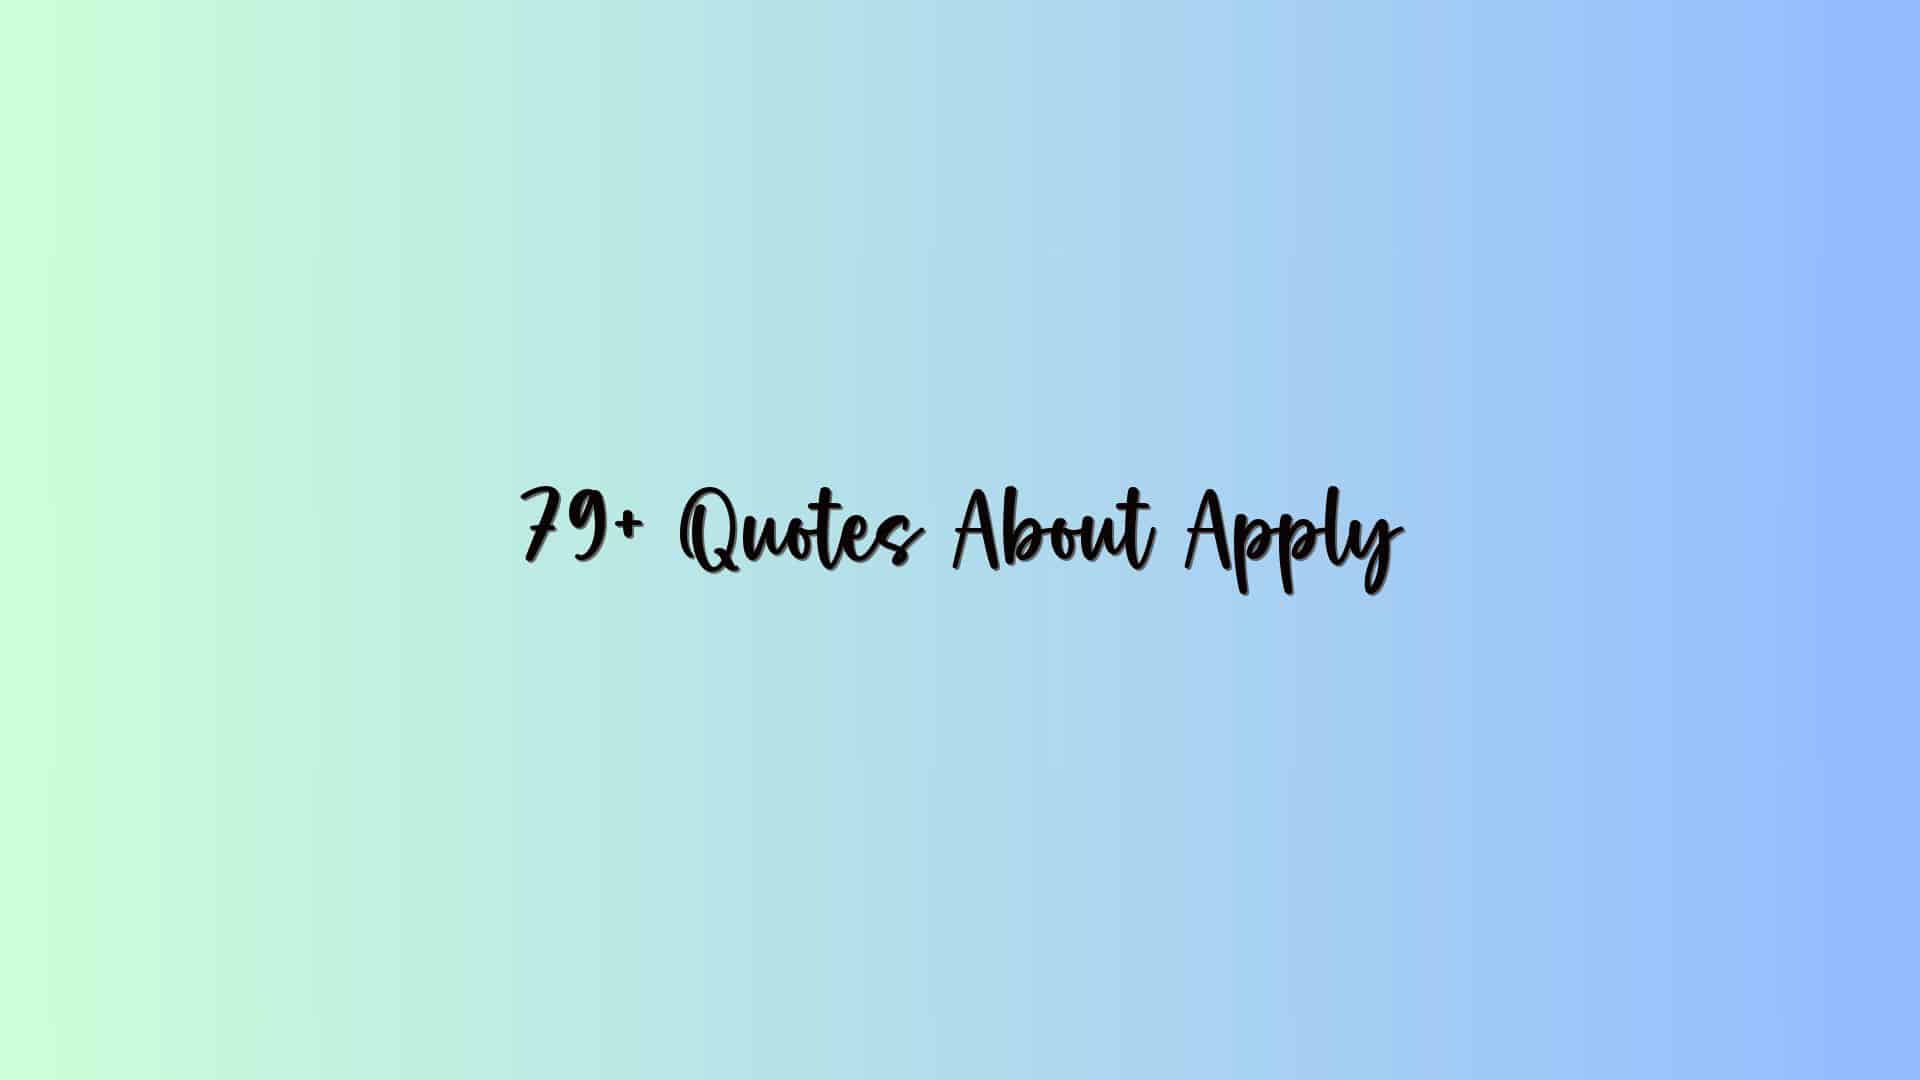 79+ Quotes About Apply